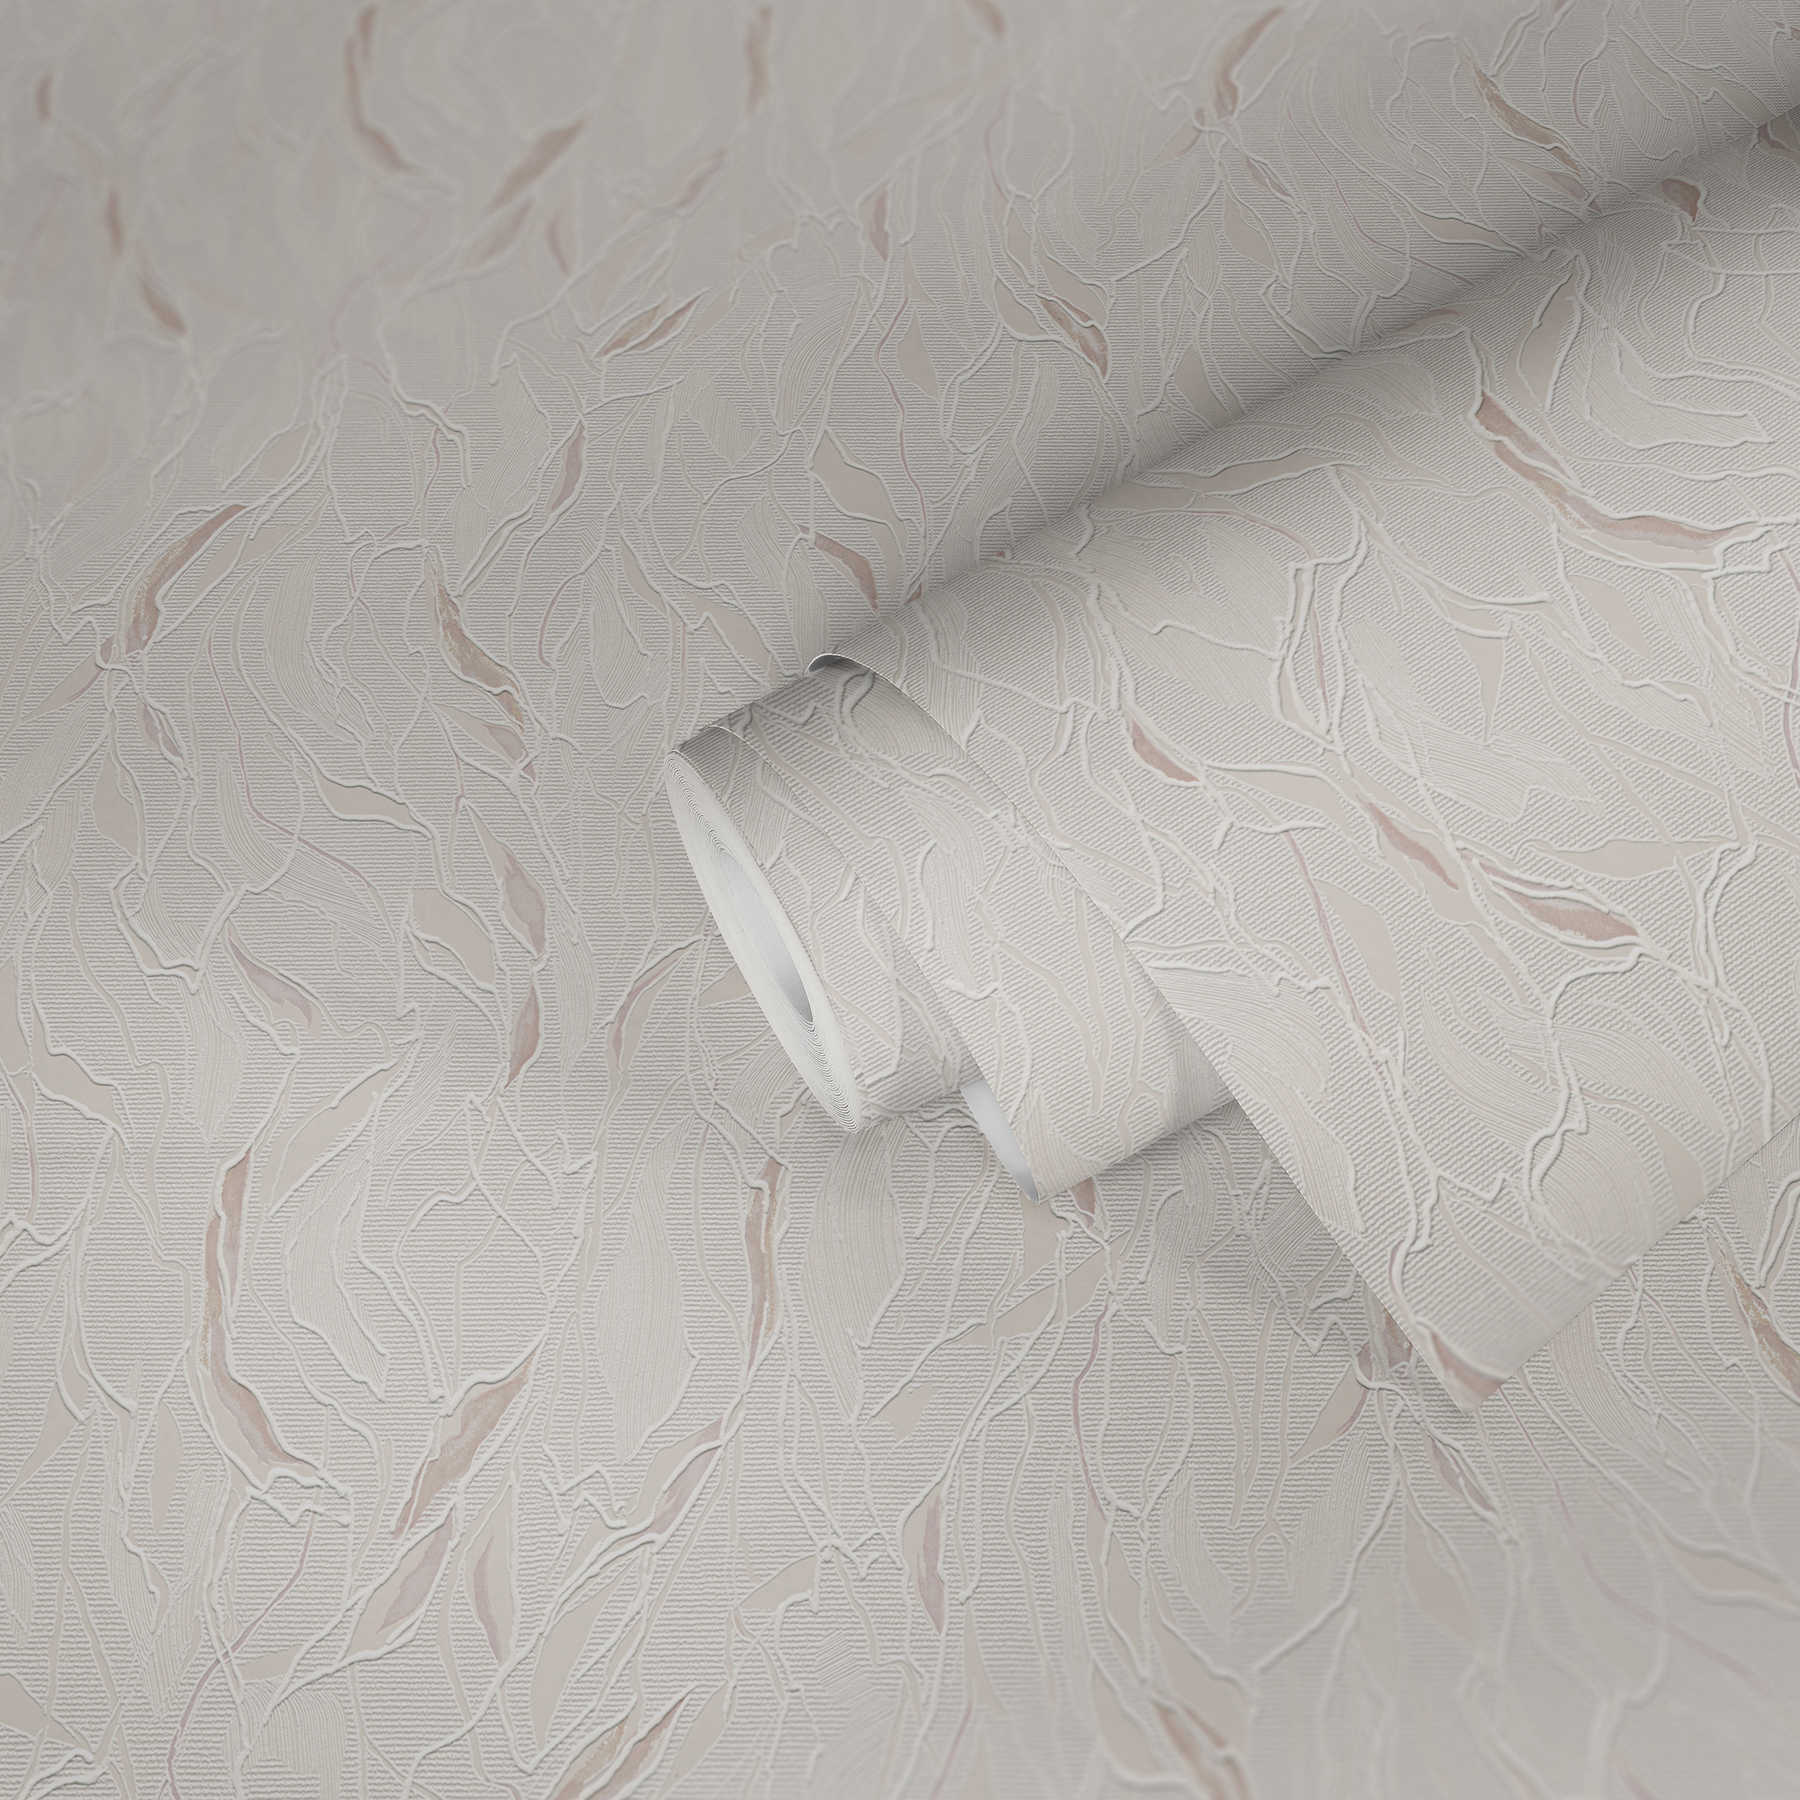             Pattern wallpaper abstract with embossing & foam structure - metallic, white
        